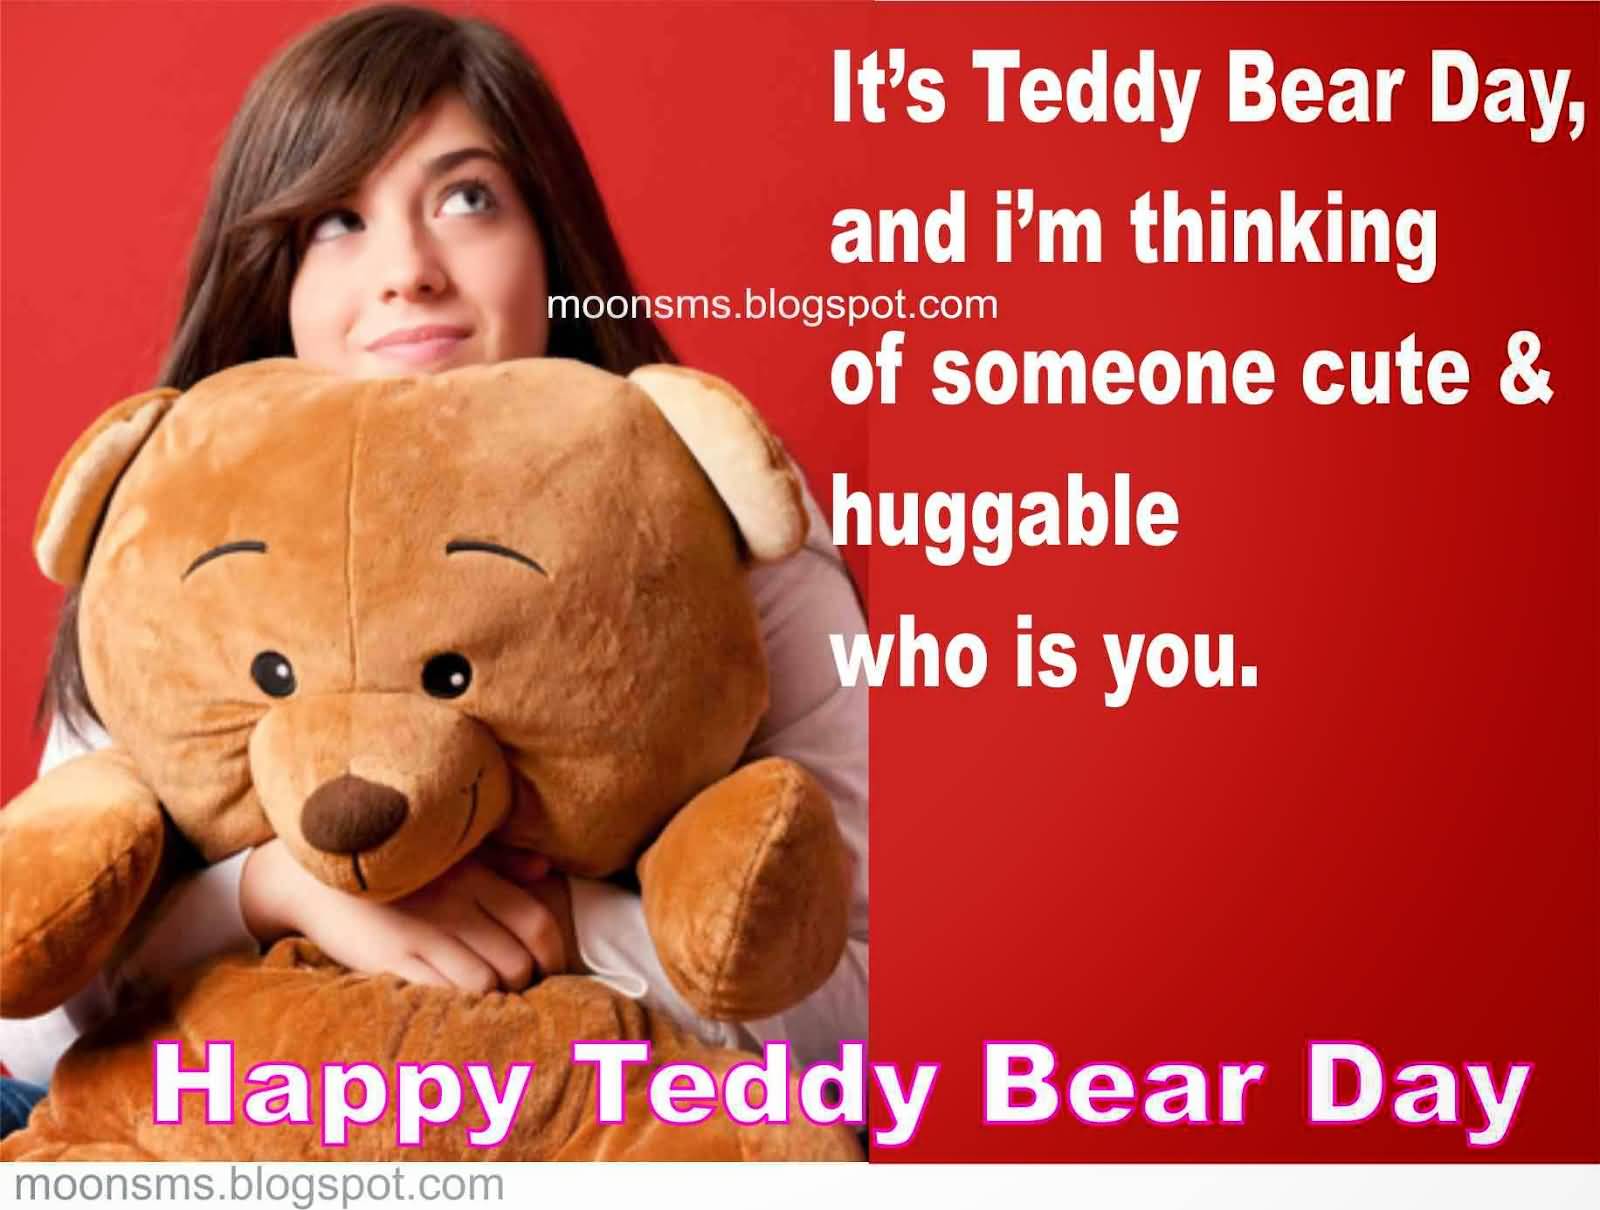 It's Teddy Bear Day, And I'm Thinking Of Someone Cute Of Huggable Who Is You. Happy Teddy Bear Day